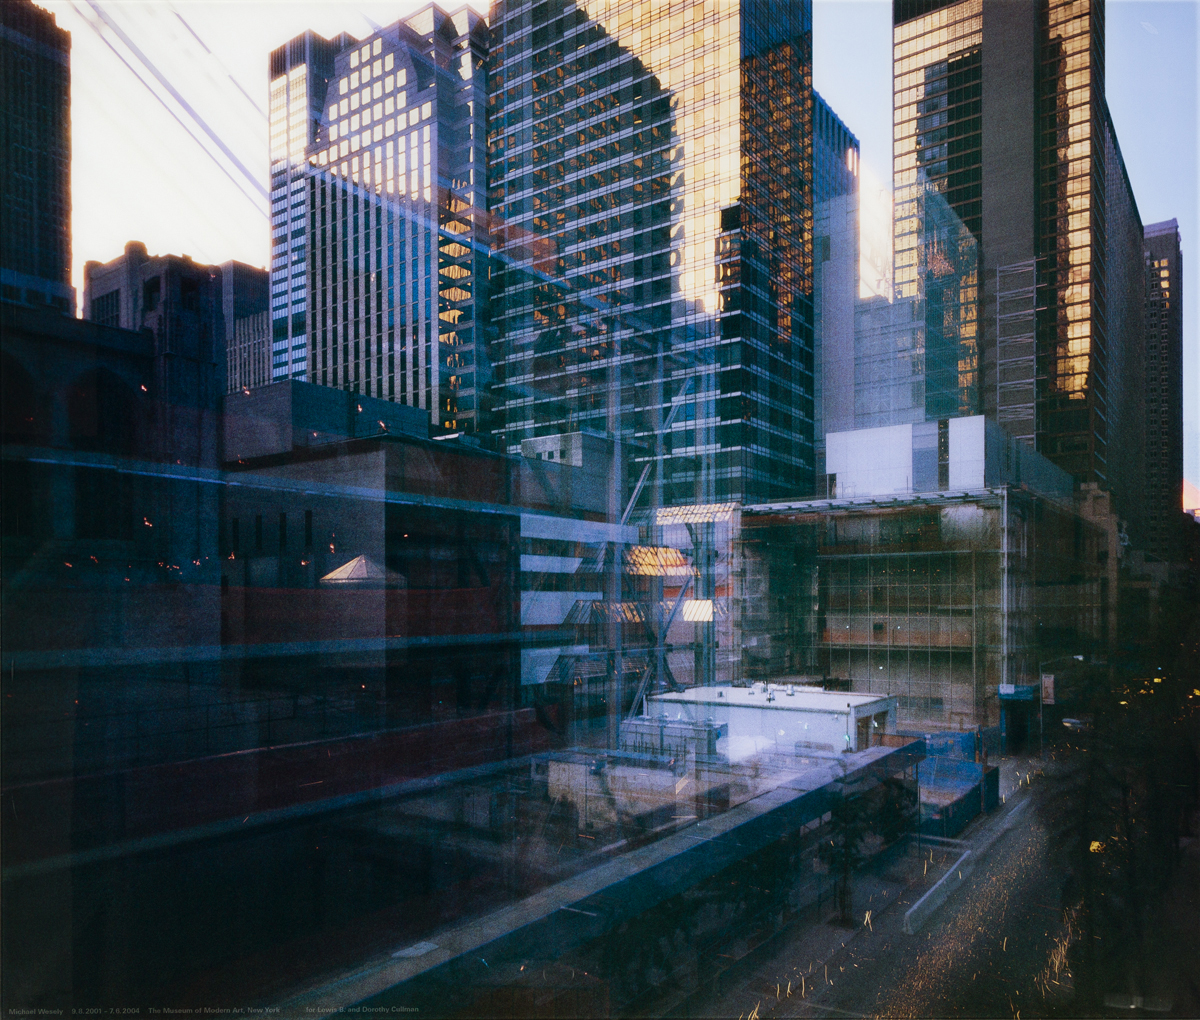 MICHAEL WESELY (1963- ) 9.8.2001-7.6.2004. The Museum of Modern Art, New York.